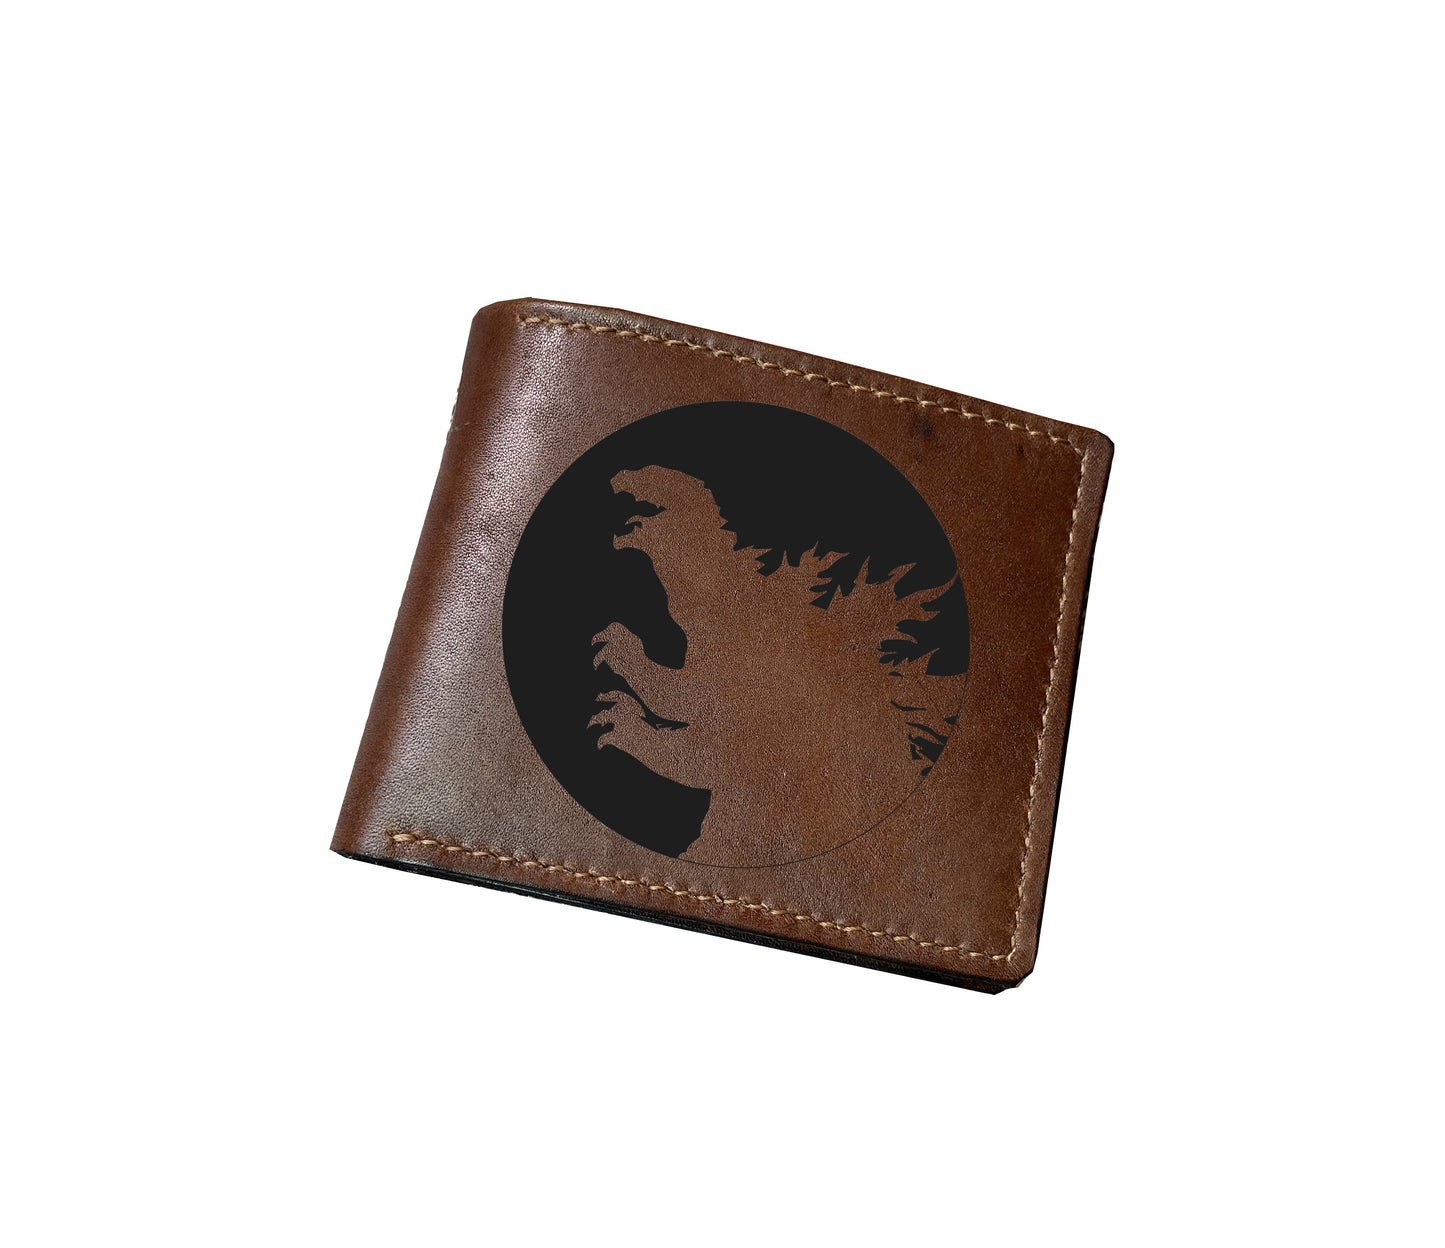 Mayan Corner - Godzilla shadow leather men's wallet, monster king wallet, birthday gifts ideas for dad, husband, brother